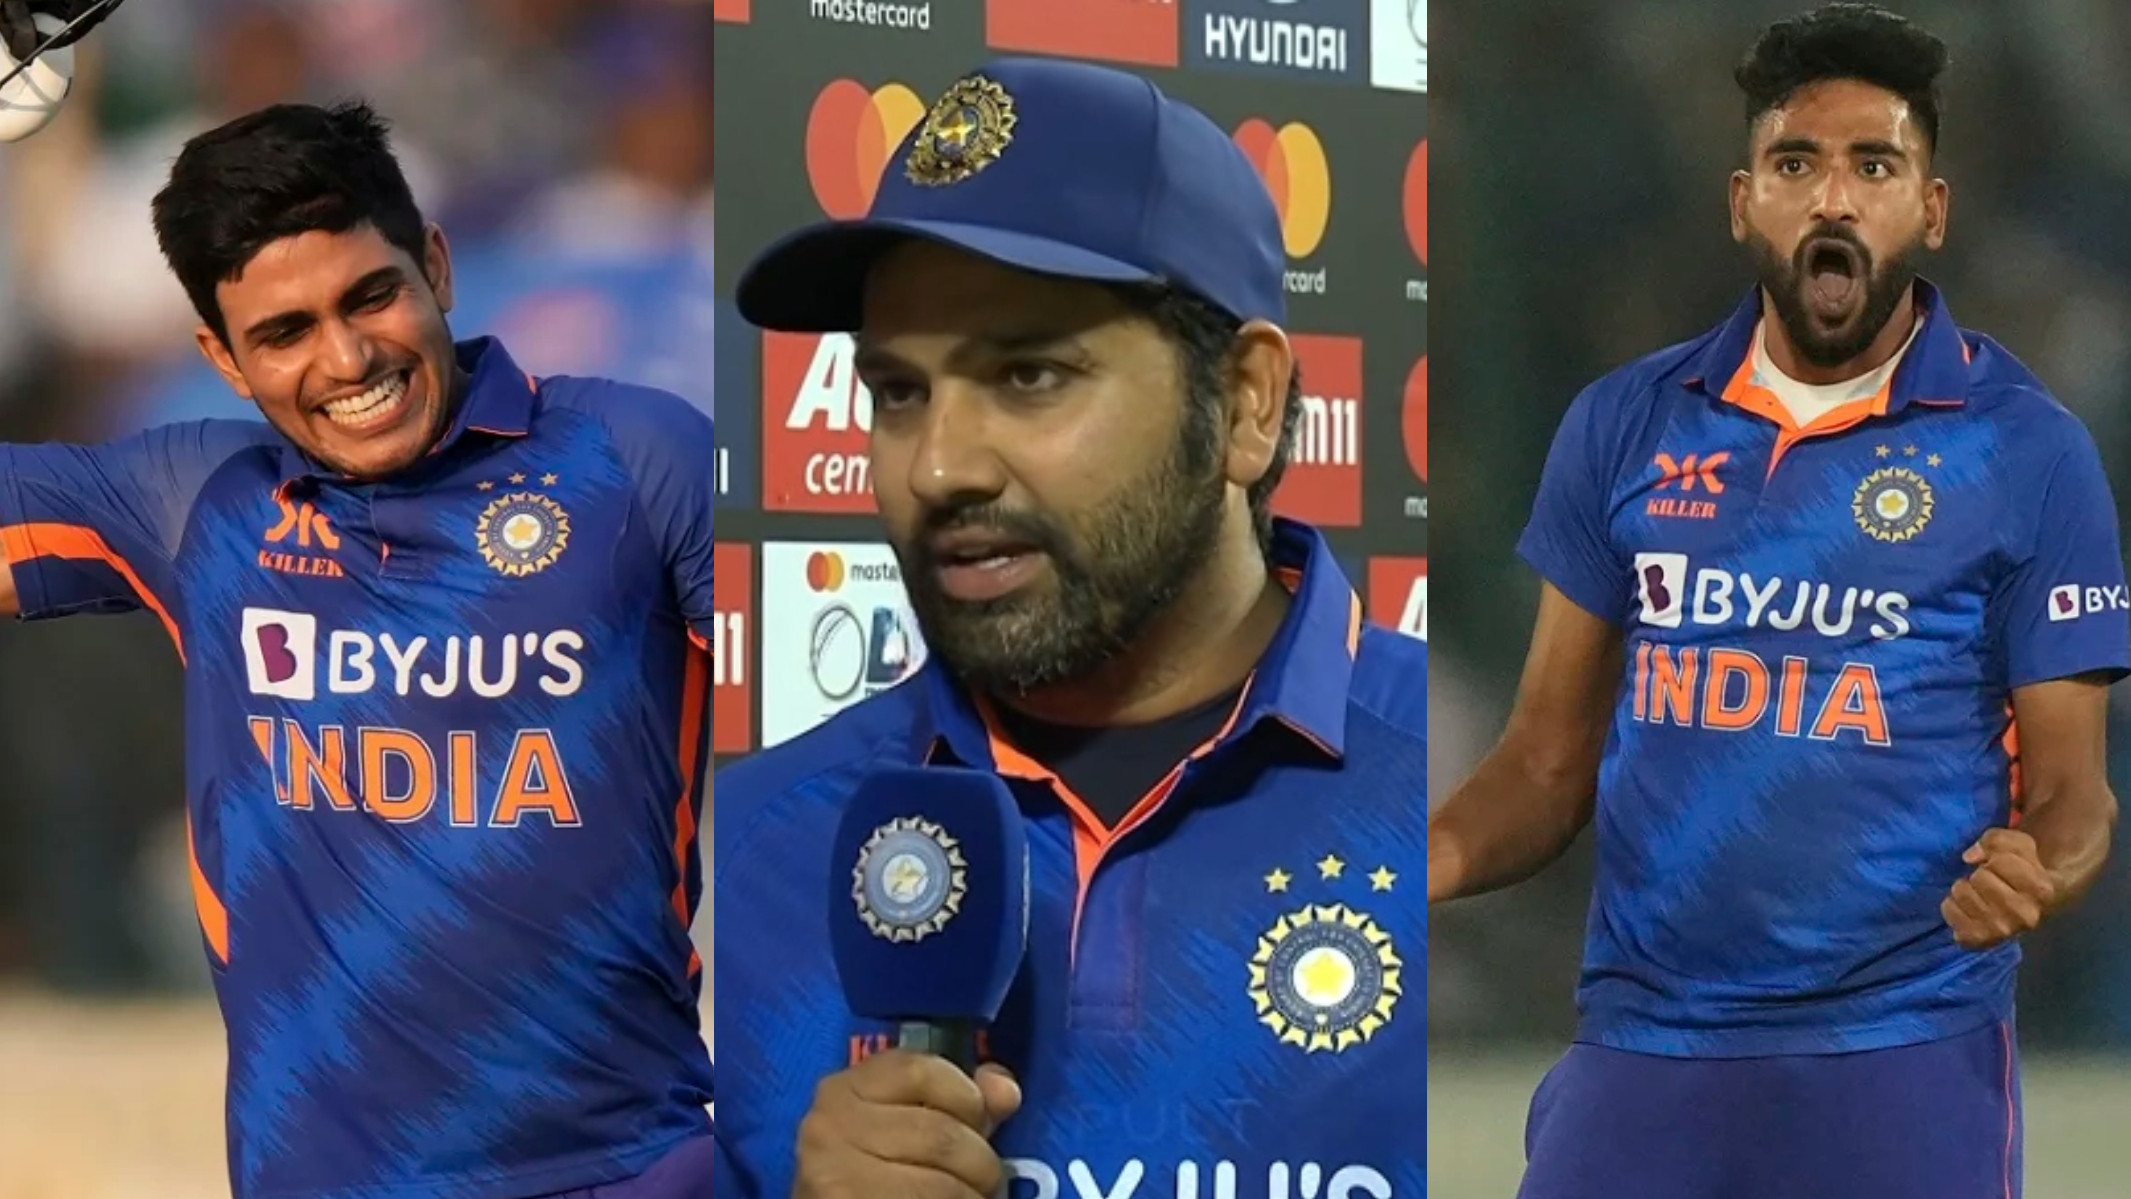 IND v NZ 2023: Rohit Sharma heartily praises performances of Shubman Gill and Mohammed Siraj after win in 1st ODI